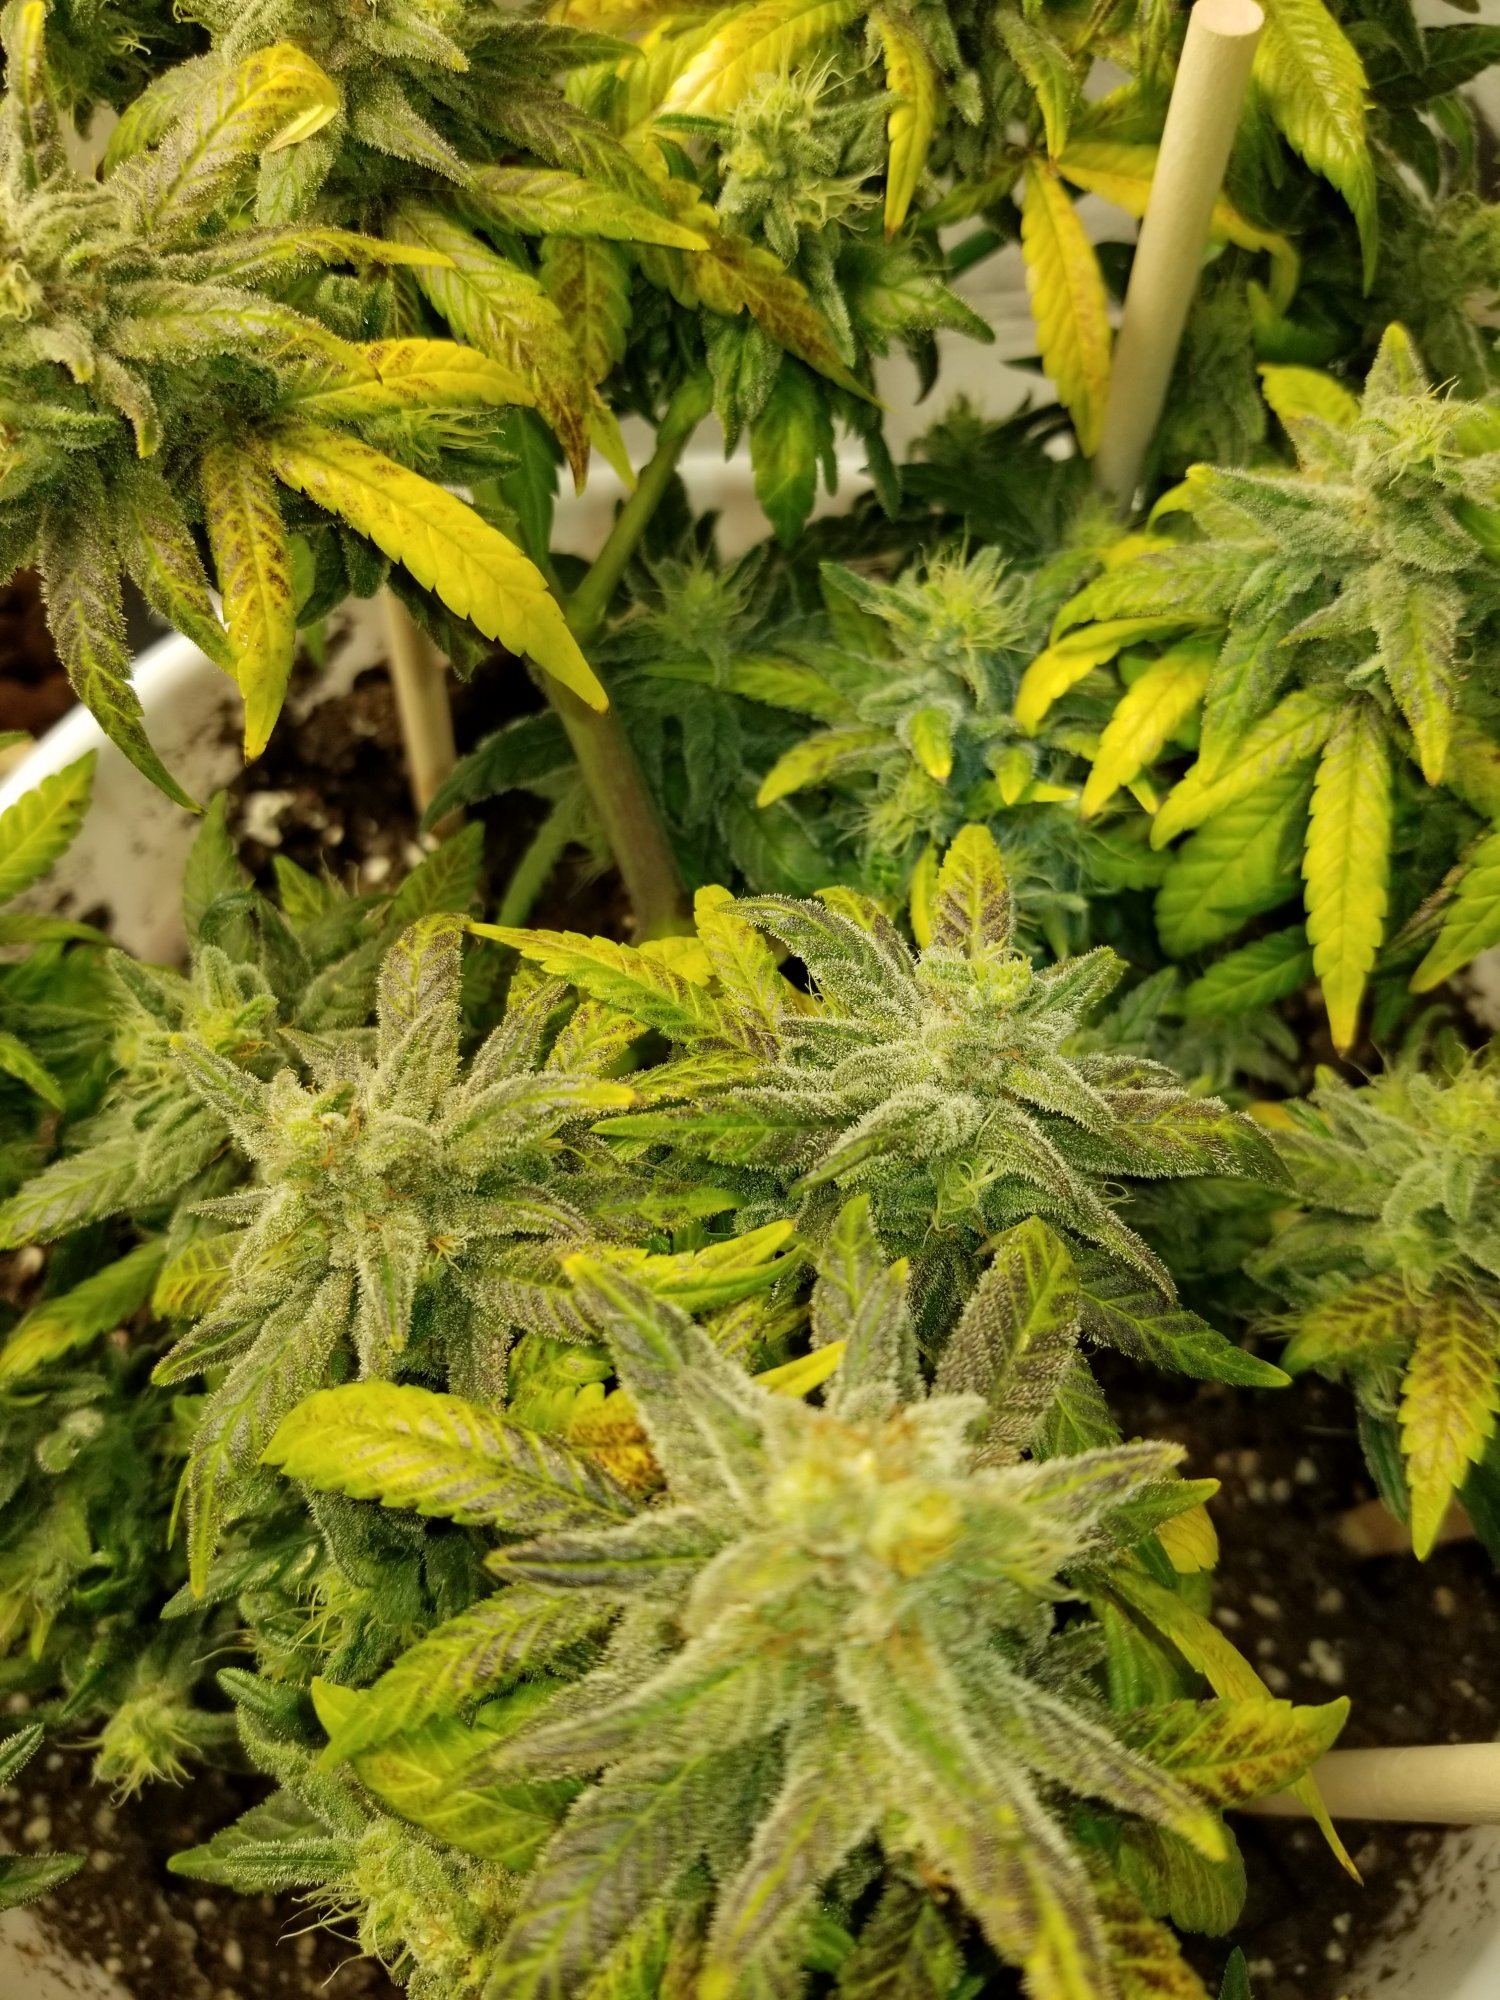 Unknown strain producing genetic foxtails 5